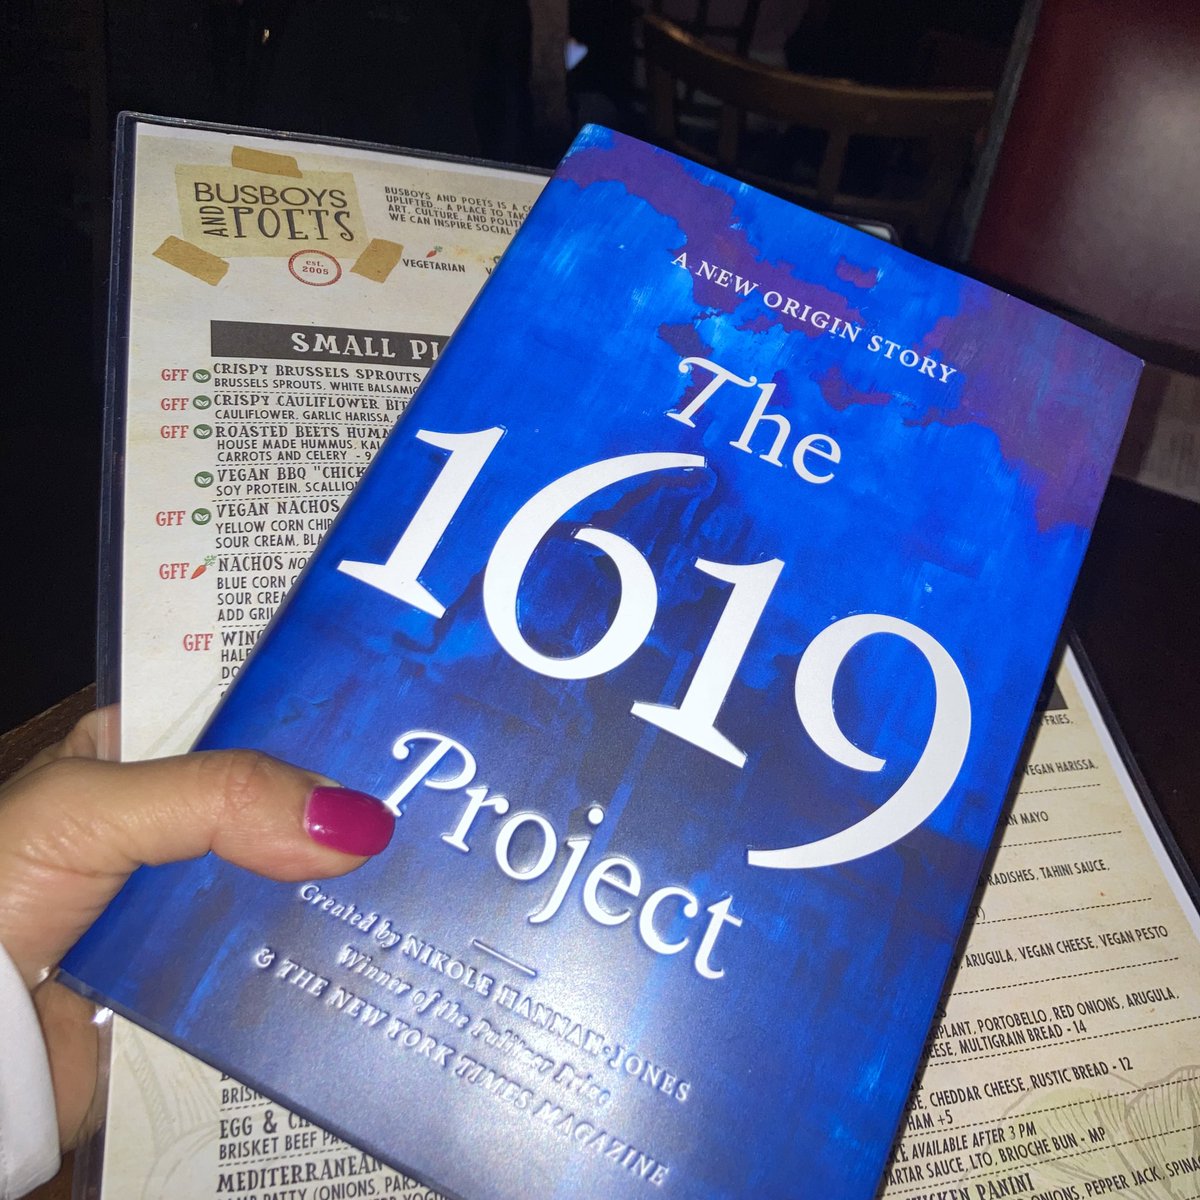 #megaexcited to listen to @nhannahjones at @busboysandpoets #1619Project